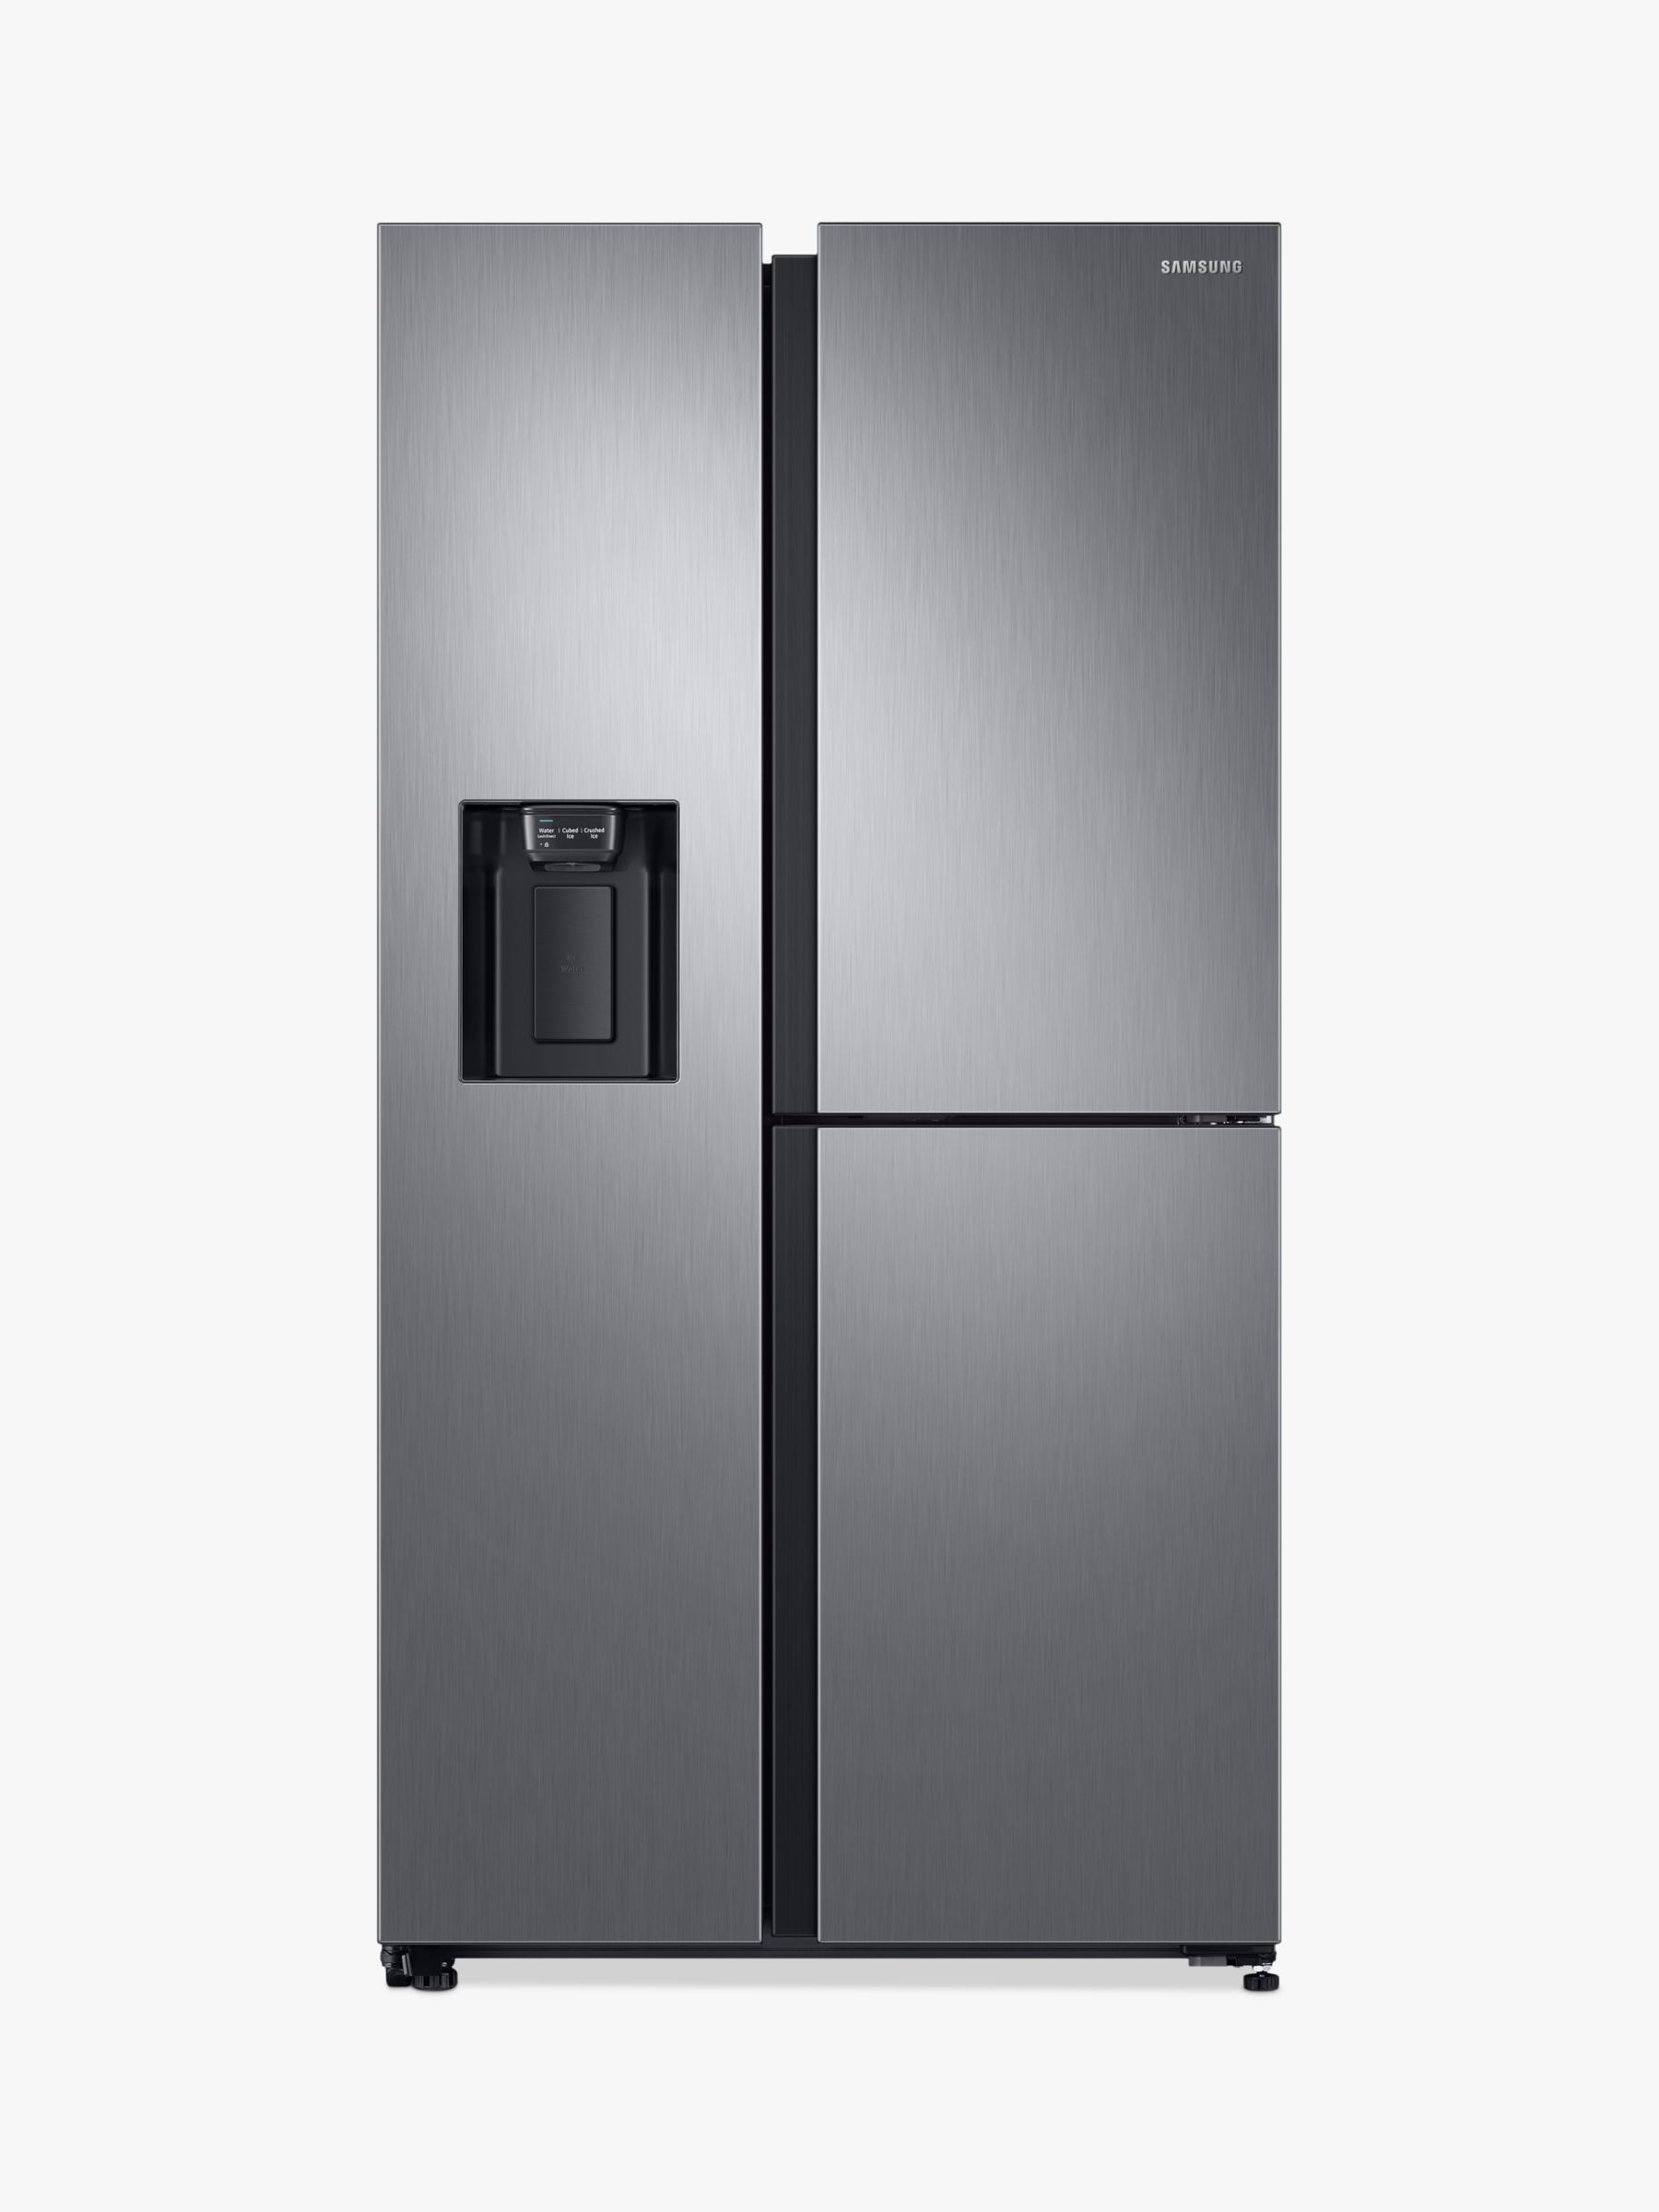 Samsung RS68N8670S9 American Style Fridge Freezer, A+ Energy Rating, 91cm Wide, Stainless Steel